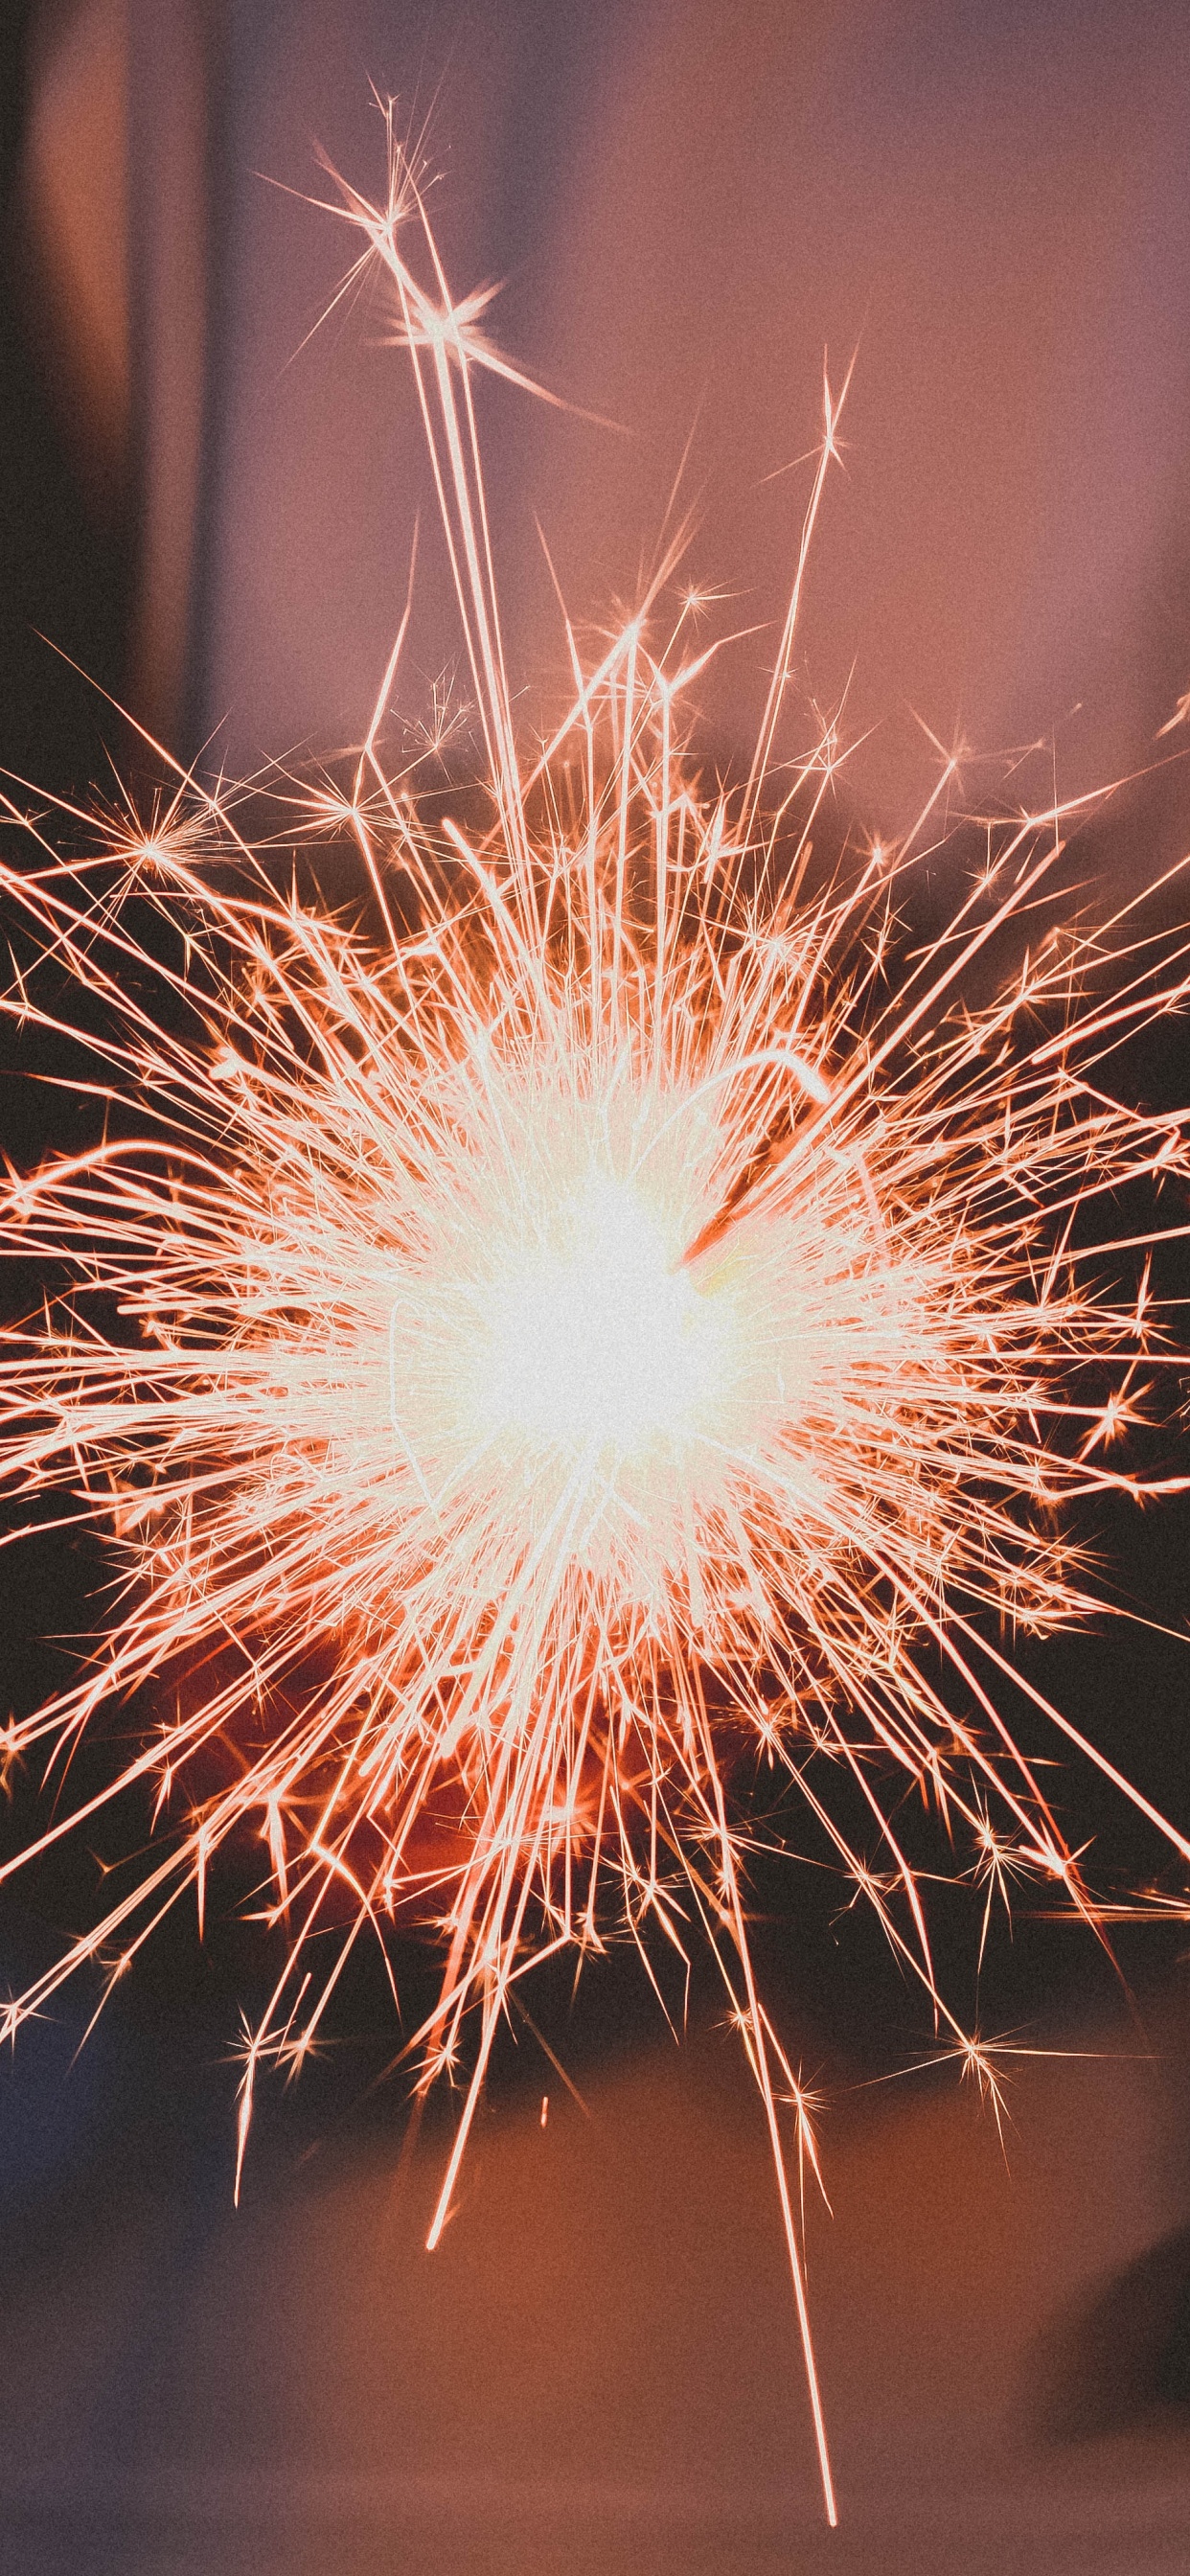 Fireworks, Sparkler, Event, New Years Day, Holiday. Wallpaper in 1242x2688 Resolution